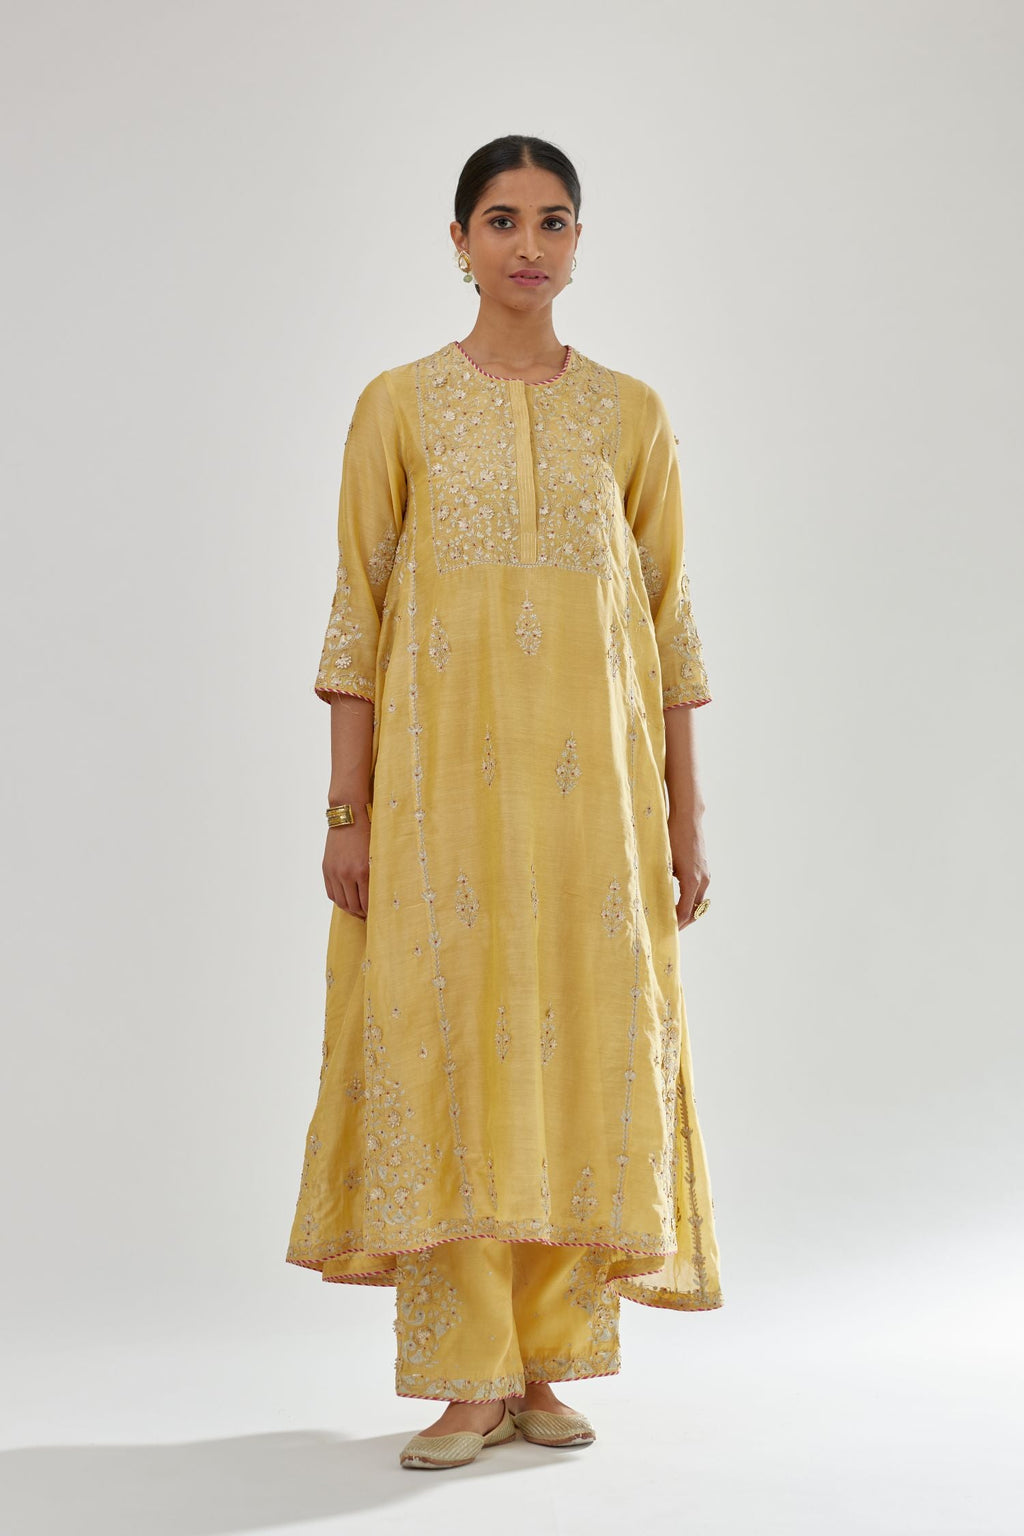 Yellow A-line long kurta with all-over zari, dori, sequins and gota embroidery.